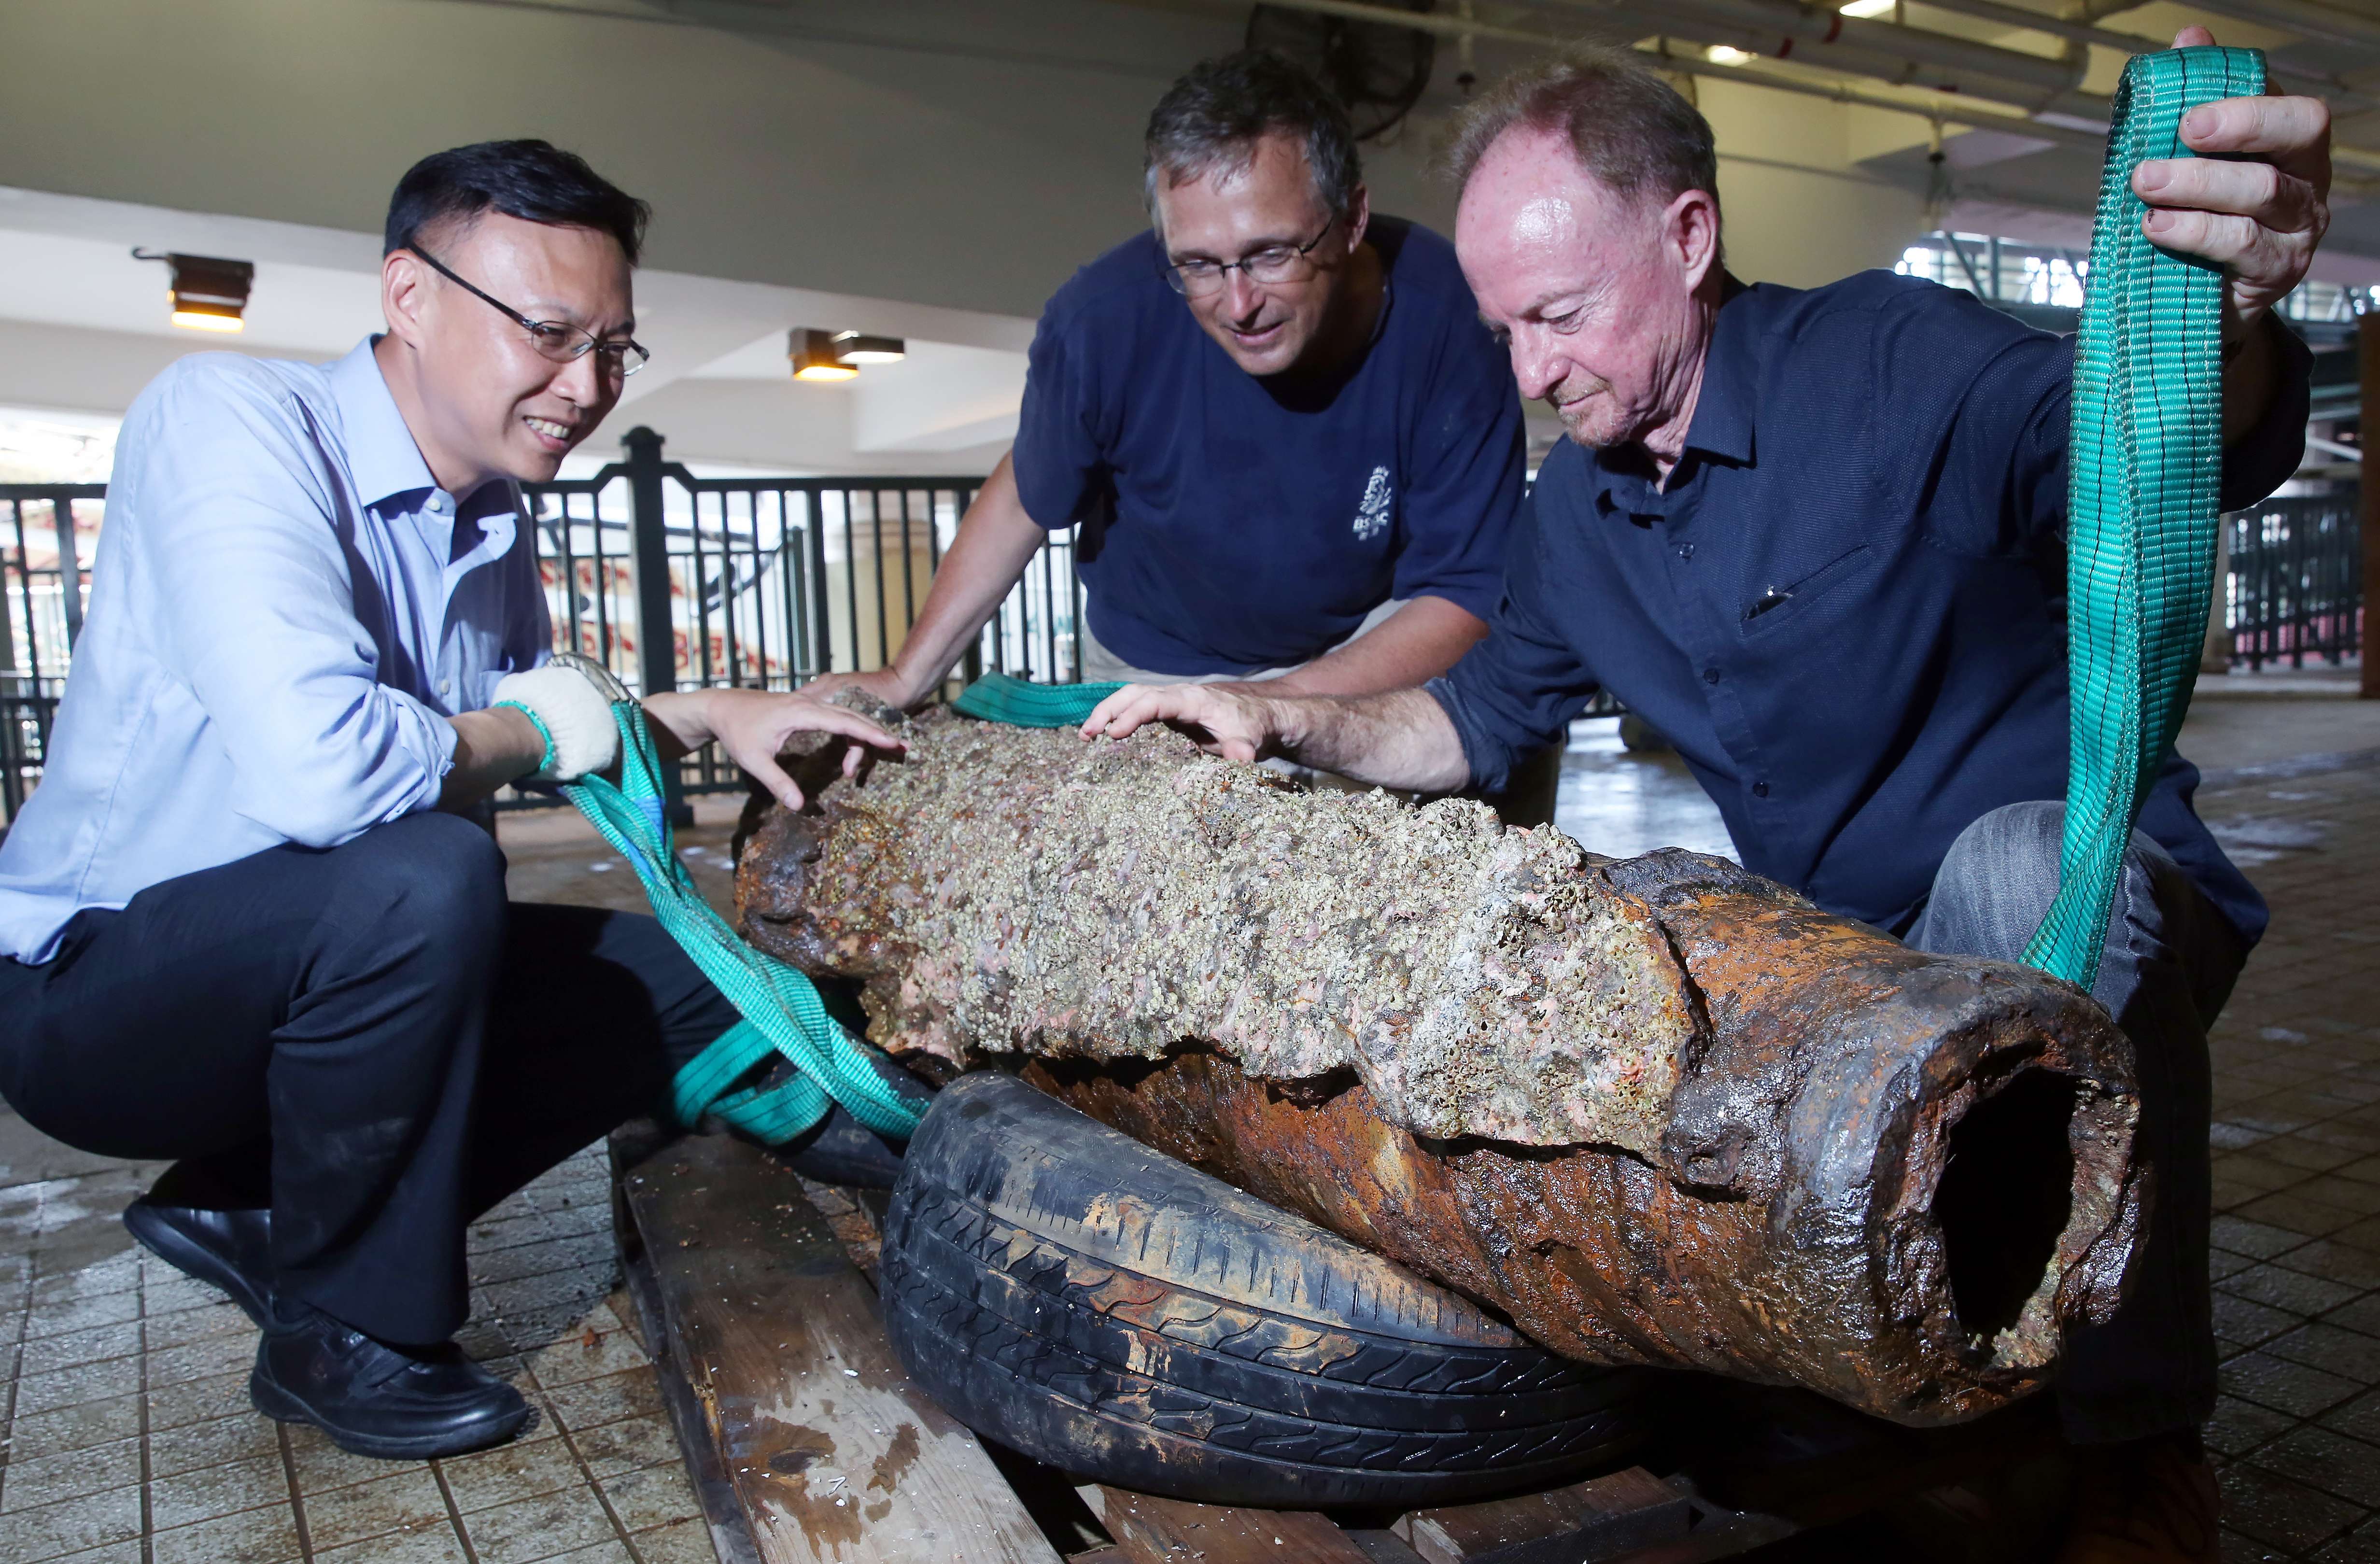 One of the old cannons discovered in Hong Kong waters and which raises questions about heritage policy. Photo: Sam Tsang